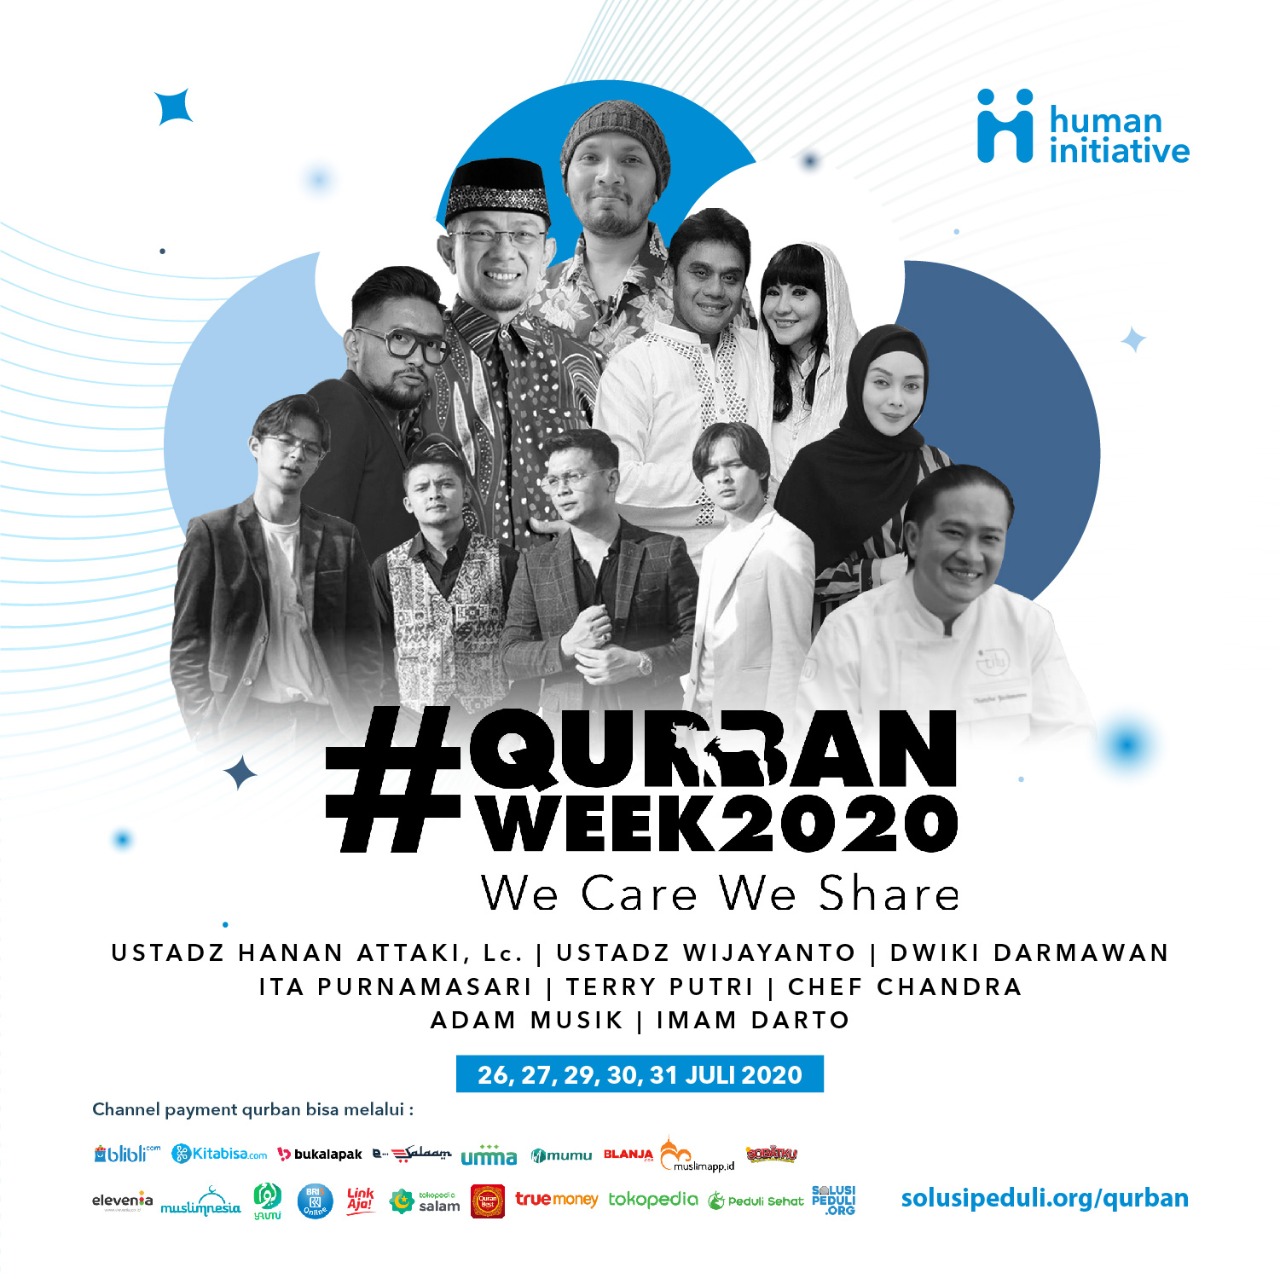 Keeping the Spirit of Qurban Amid the Pandemic, Human Initiative Holds a Qurban Week 2020 Event, We Care We Share!